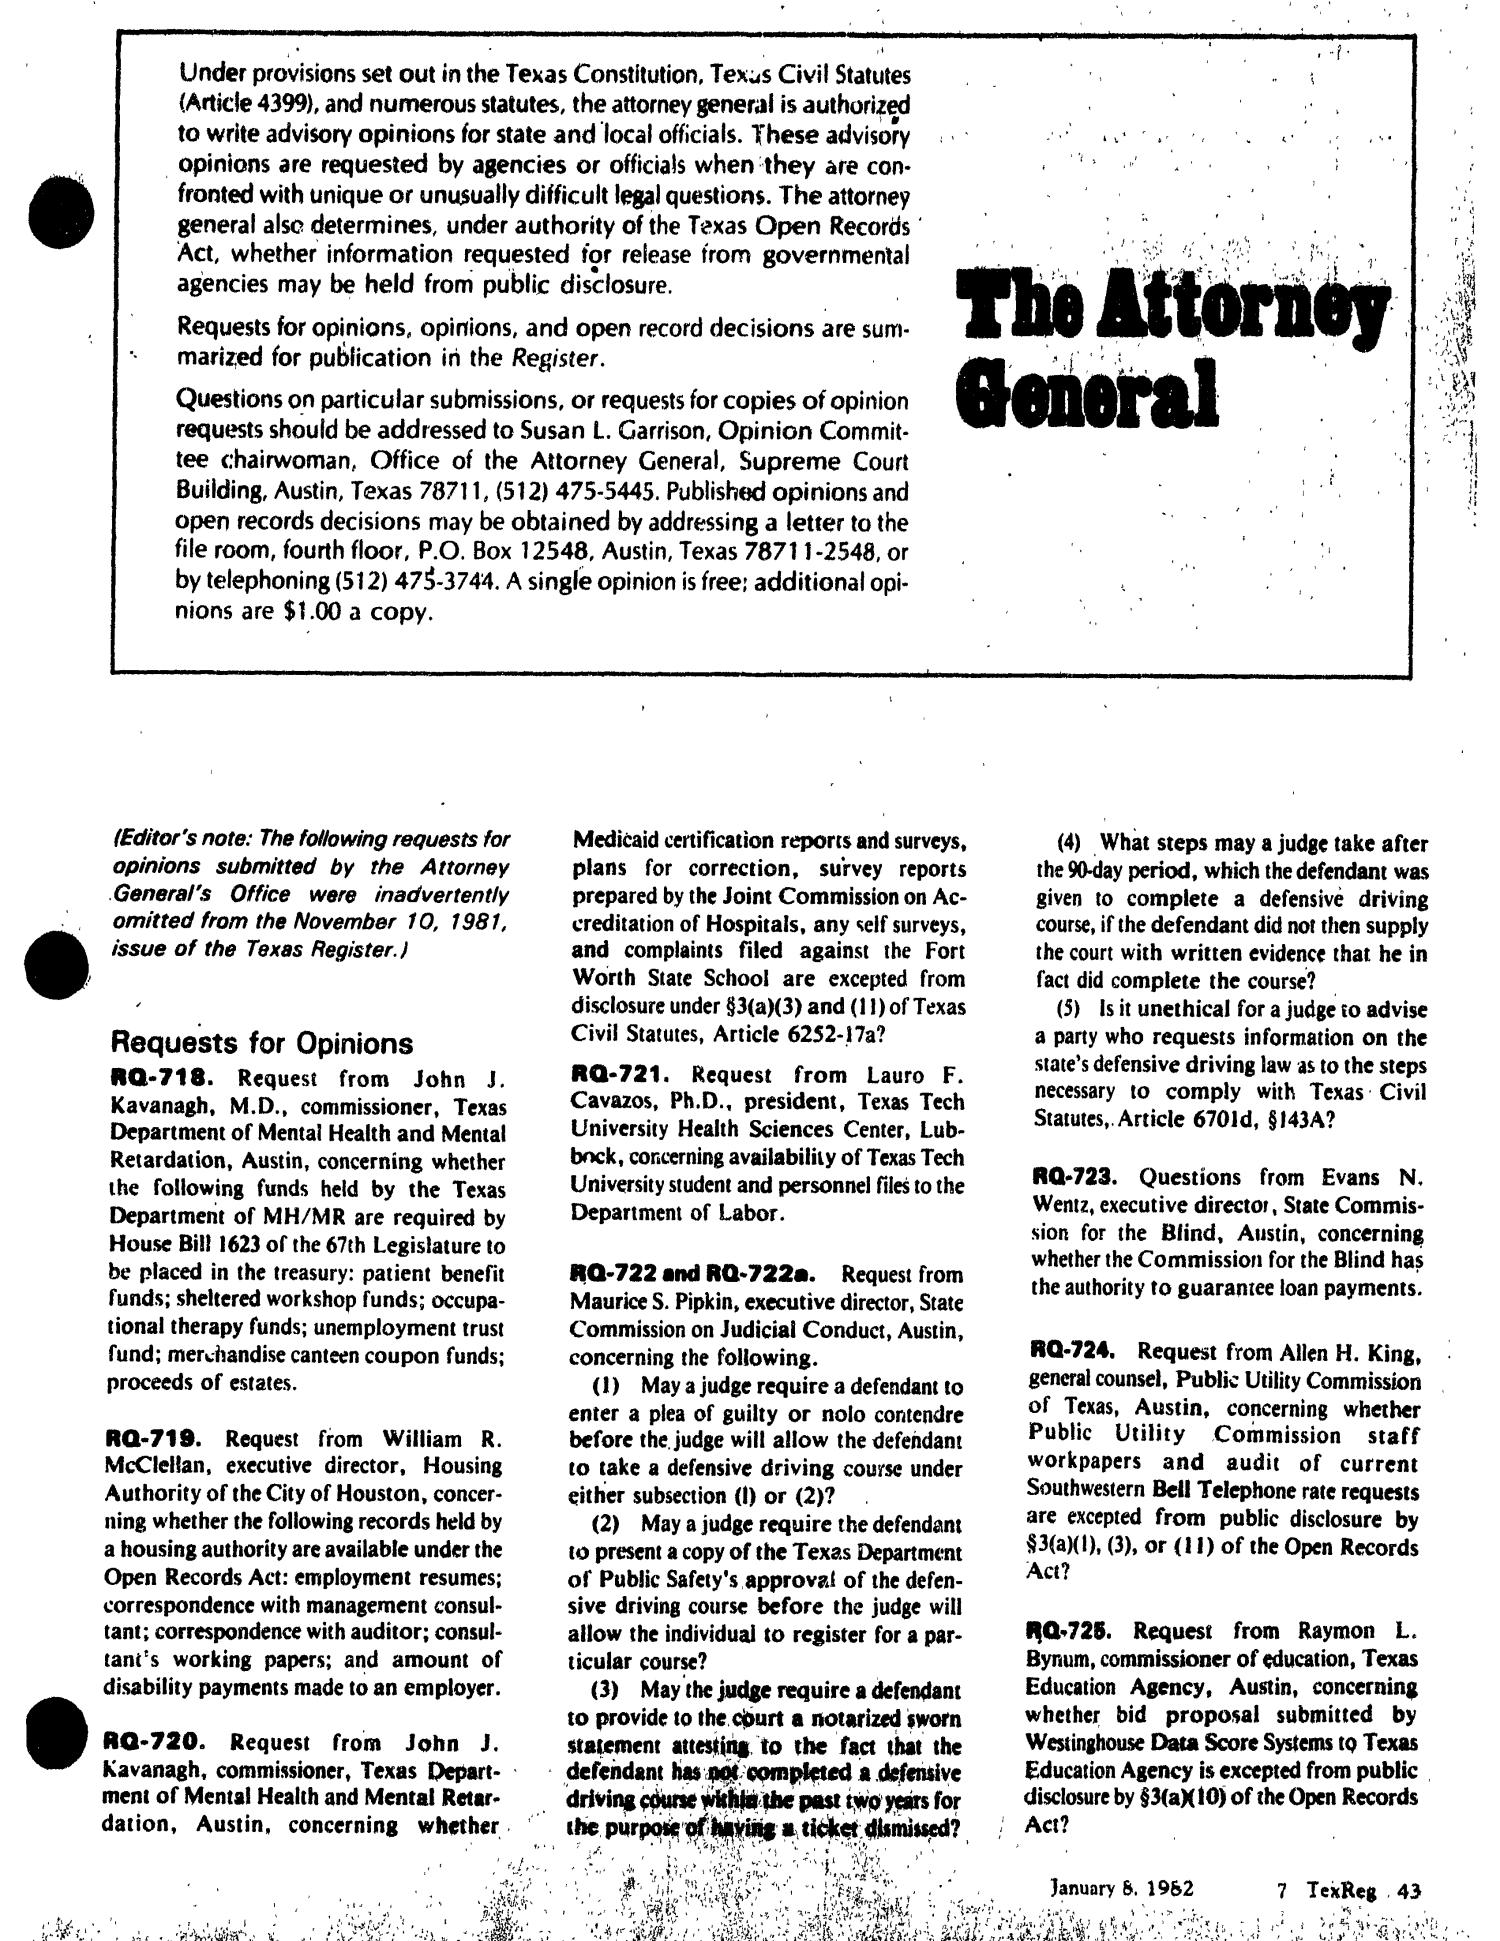 Texas Register, Volume 7, Number 2, Pages 39-114, January 8, 1982
                                                
                                                    43
                                                